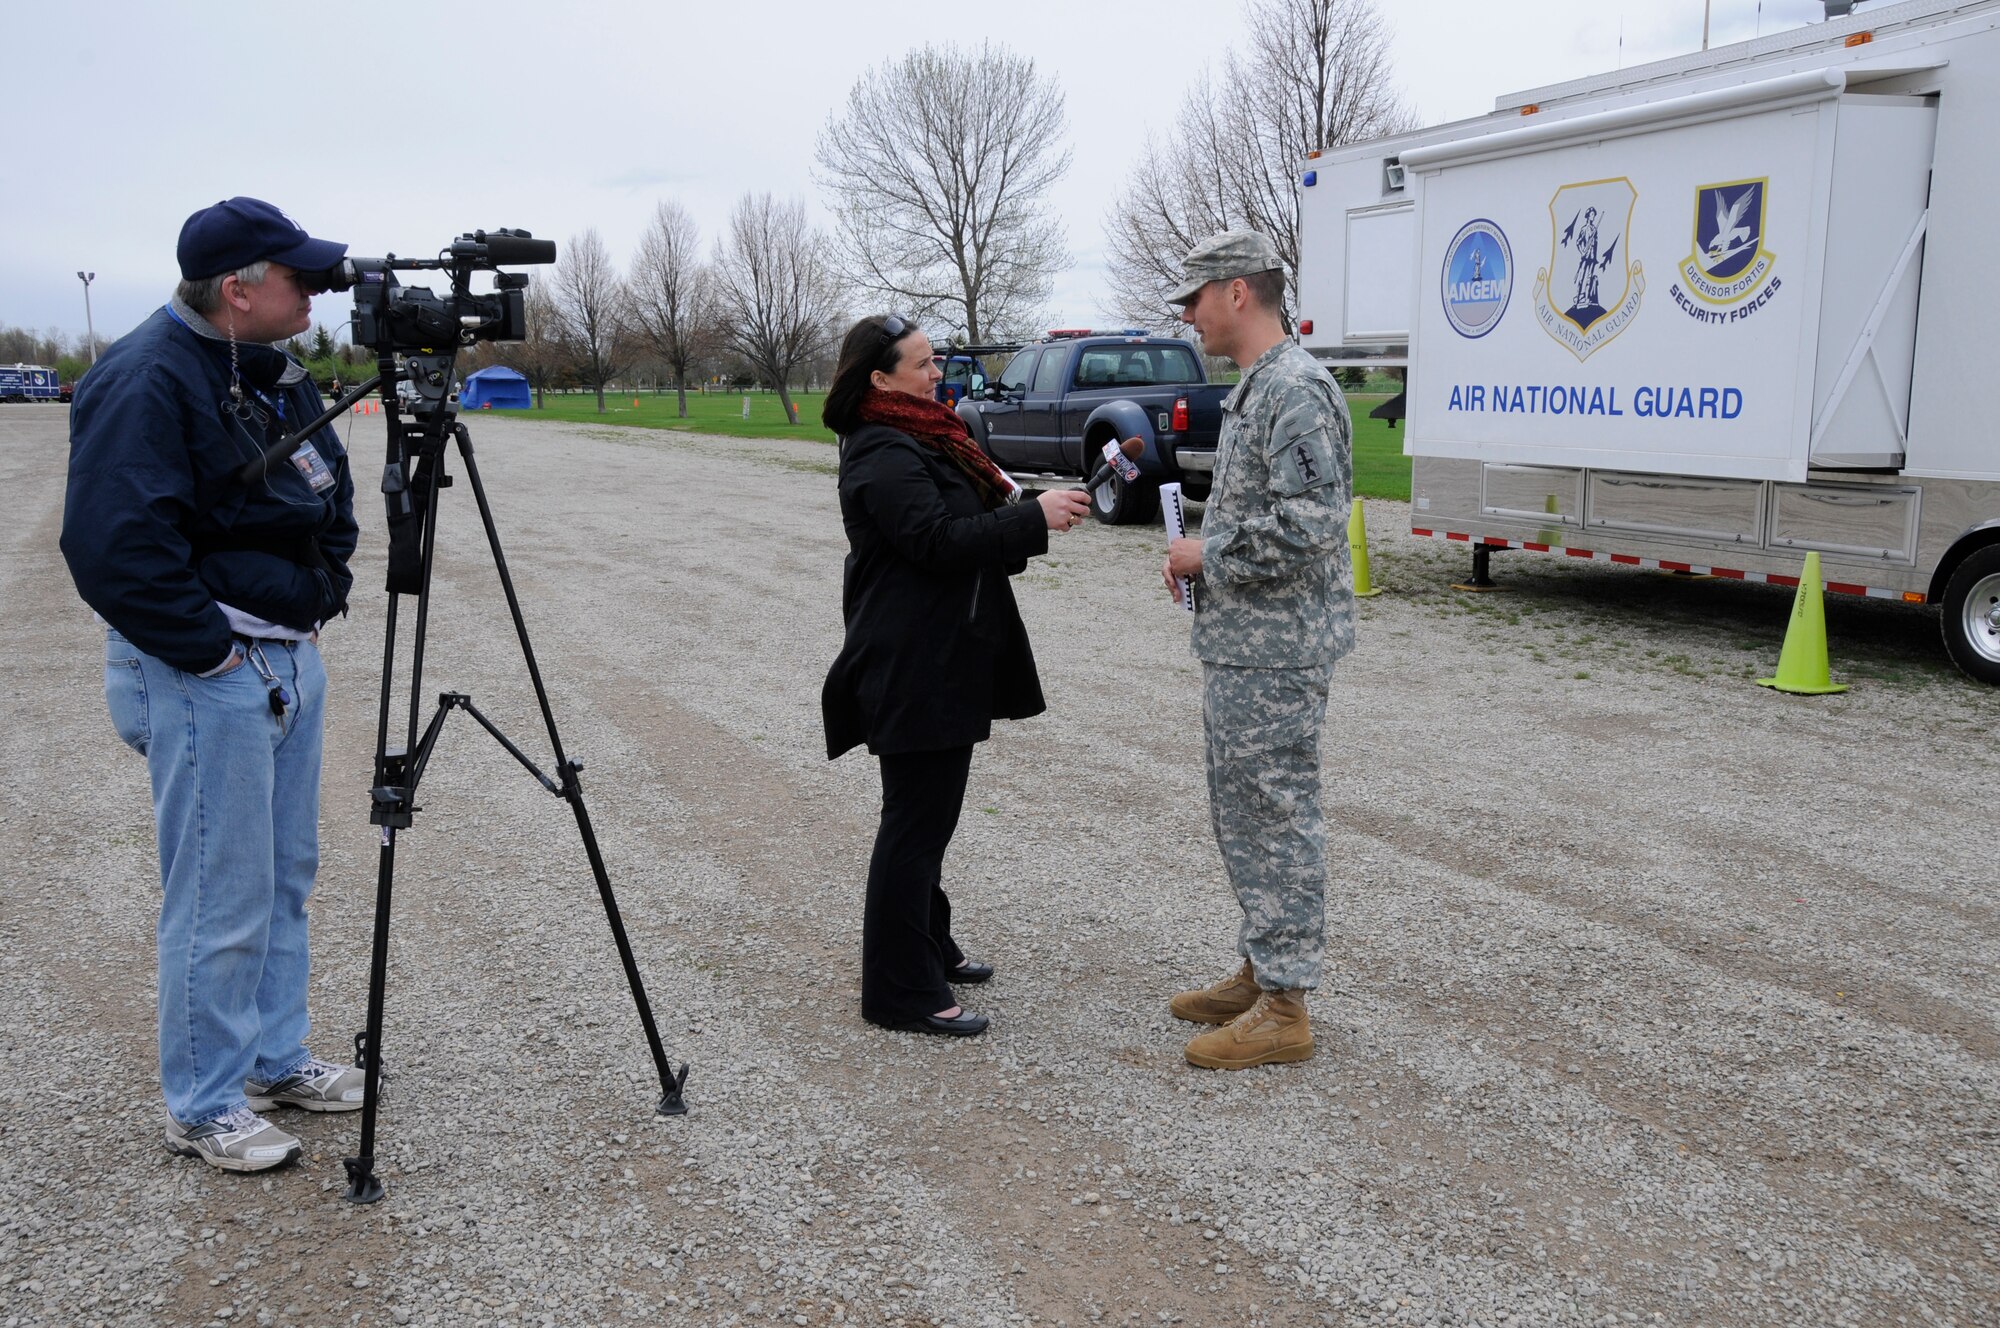 Army Capt. Chris Robbins, Officer in Charge, Wisconsin National Guard Joint Operations Center, is interviewed by Emily Matesic, a reporter from WBAY-TV during SIMCOM 2014 at Sunnyview Expo Center in Oshkosh, Wis. May 15, 2014. SIMCOM (State Interoperable Mobile Communications) is a functional exercise designed to test the interoperability of federal, state, county, tribal, volunteer, private organizations and defense communications and data sharing. Air National Guard photo by Tech. Sgt. Todd Pendleton (Released)